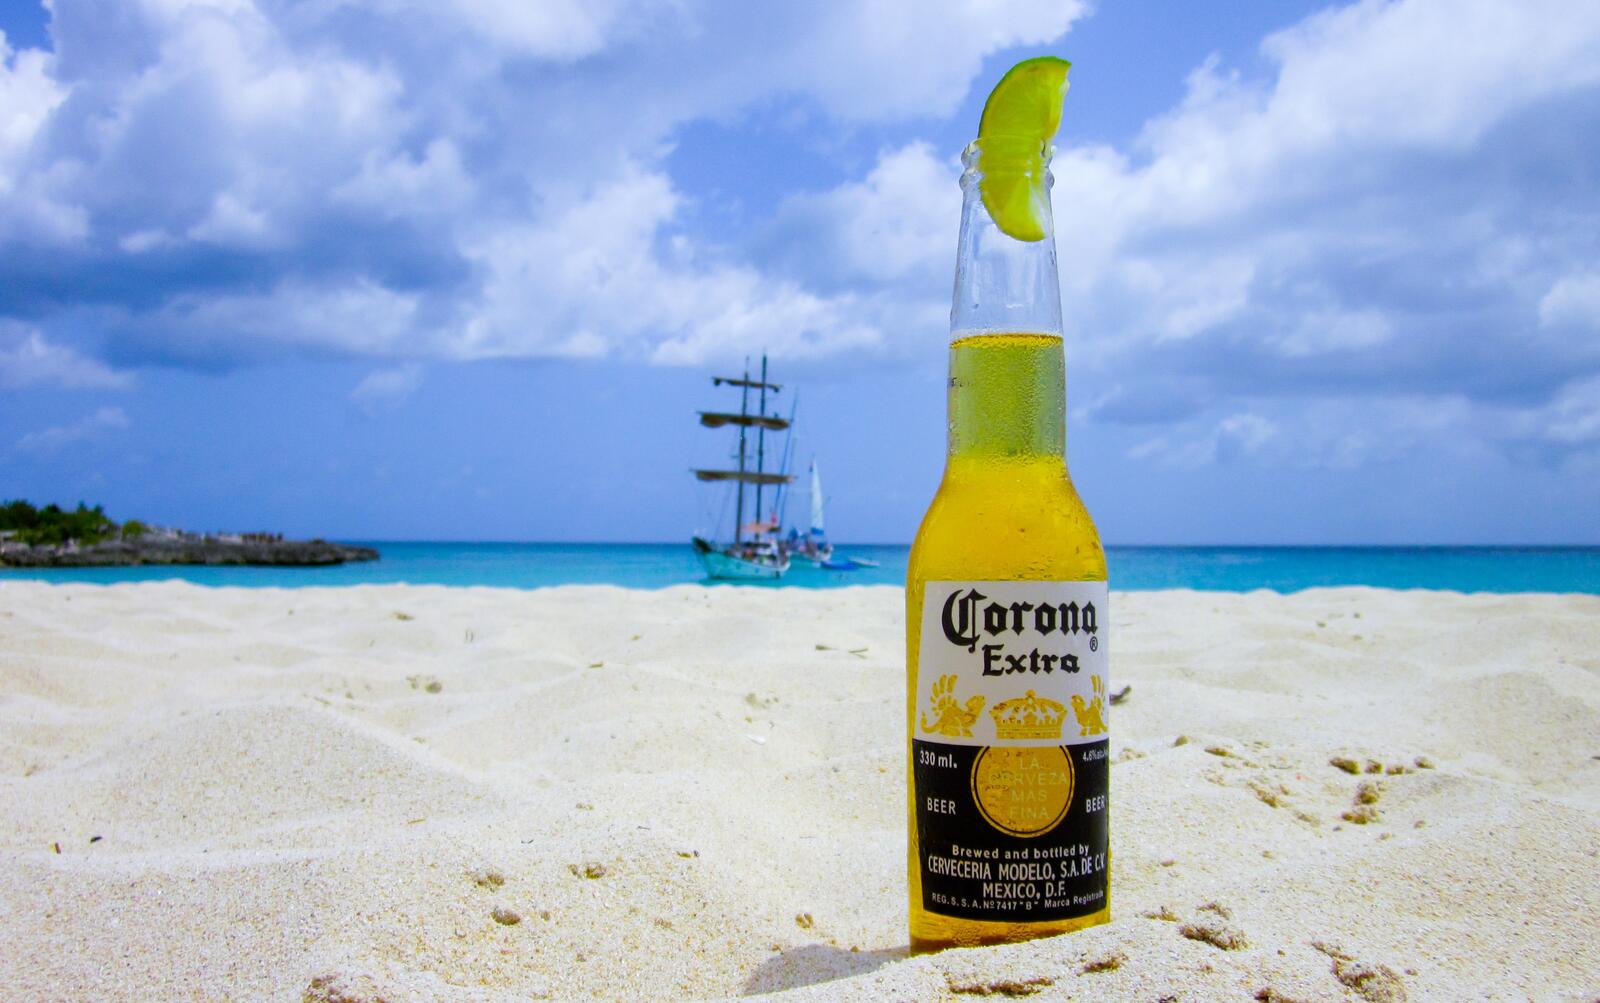 Free photo A bottle of crown on the white sand by the sea